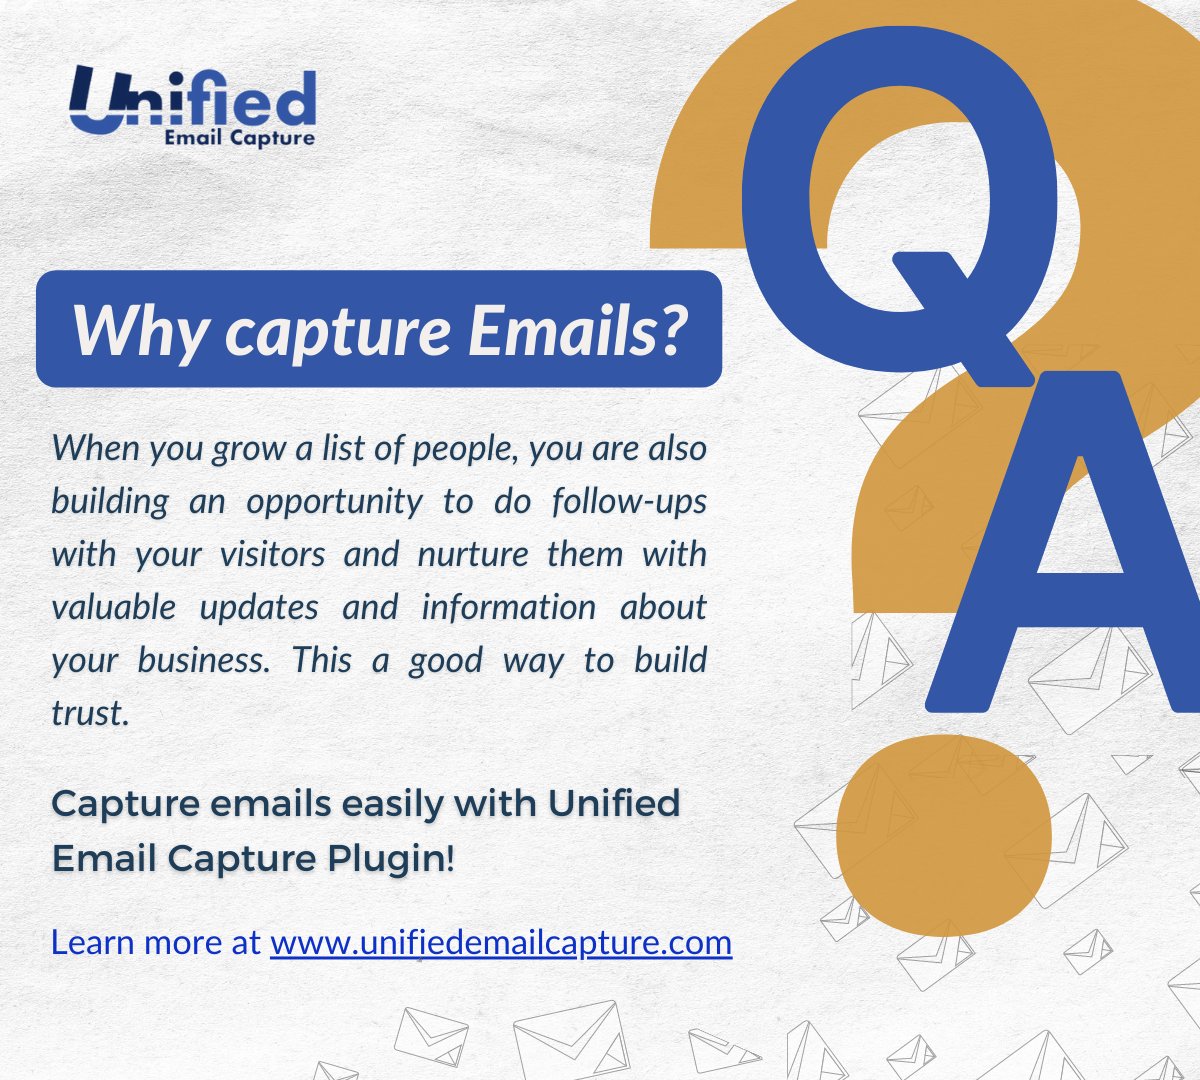 Unlock the power of follow-ups & nurture your visitors with valuable updates &  information about your business! 

So, start capturing emails effortlessly with Unified Email Capture Plugin! 

unifiedemailcapture.com 

#emaillistbuilding #emailmarketing #digitalmarketing #plugins